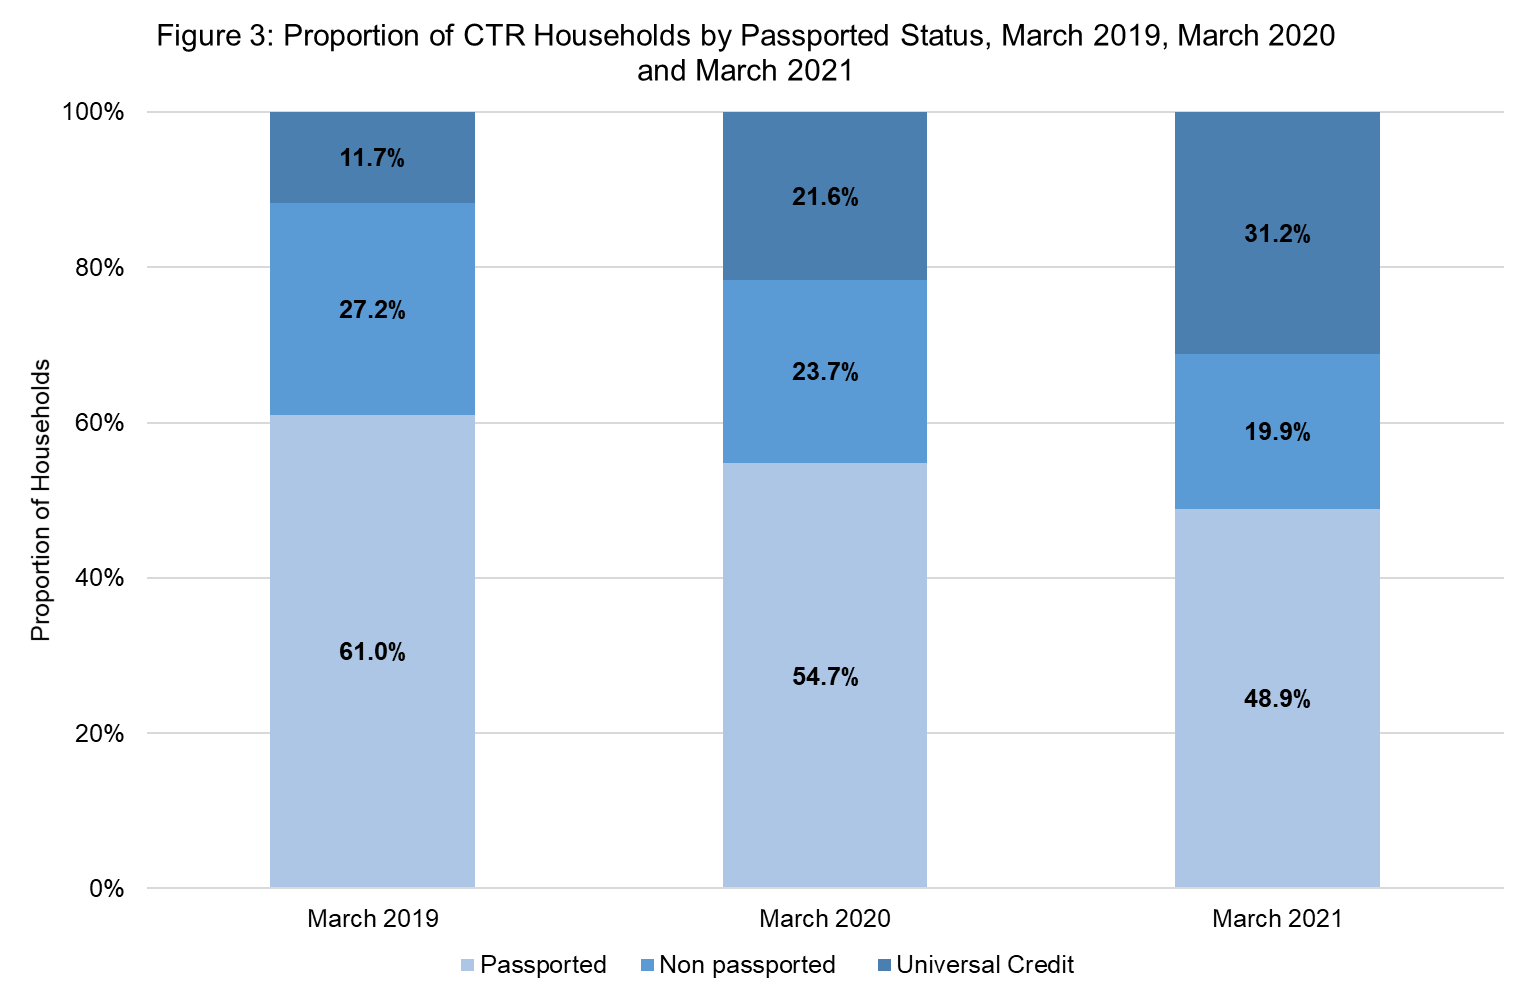 Figure 3 shows the proportion of CTR households by passported status in March 2019, March 2020 and March 2021.  The bars in this chart show that in March 2019 61% of cases were passported, 27.2% were non Passported and 11.7% were on UC.  In March 2020 54.7% were passported, 23.7% were non passported and 21.6% were on UC.  In March 2021 48.9% of cases were passported, 19.9% were non passported and 31.2% were on UC.